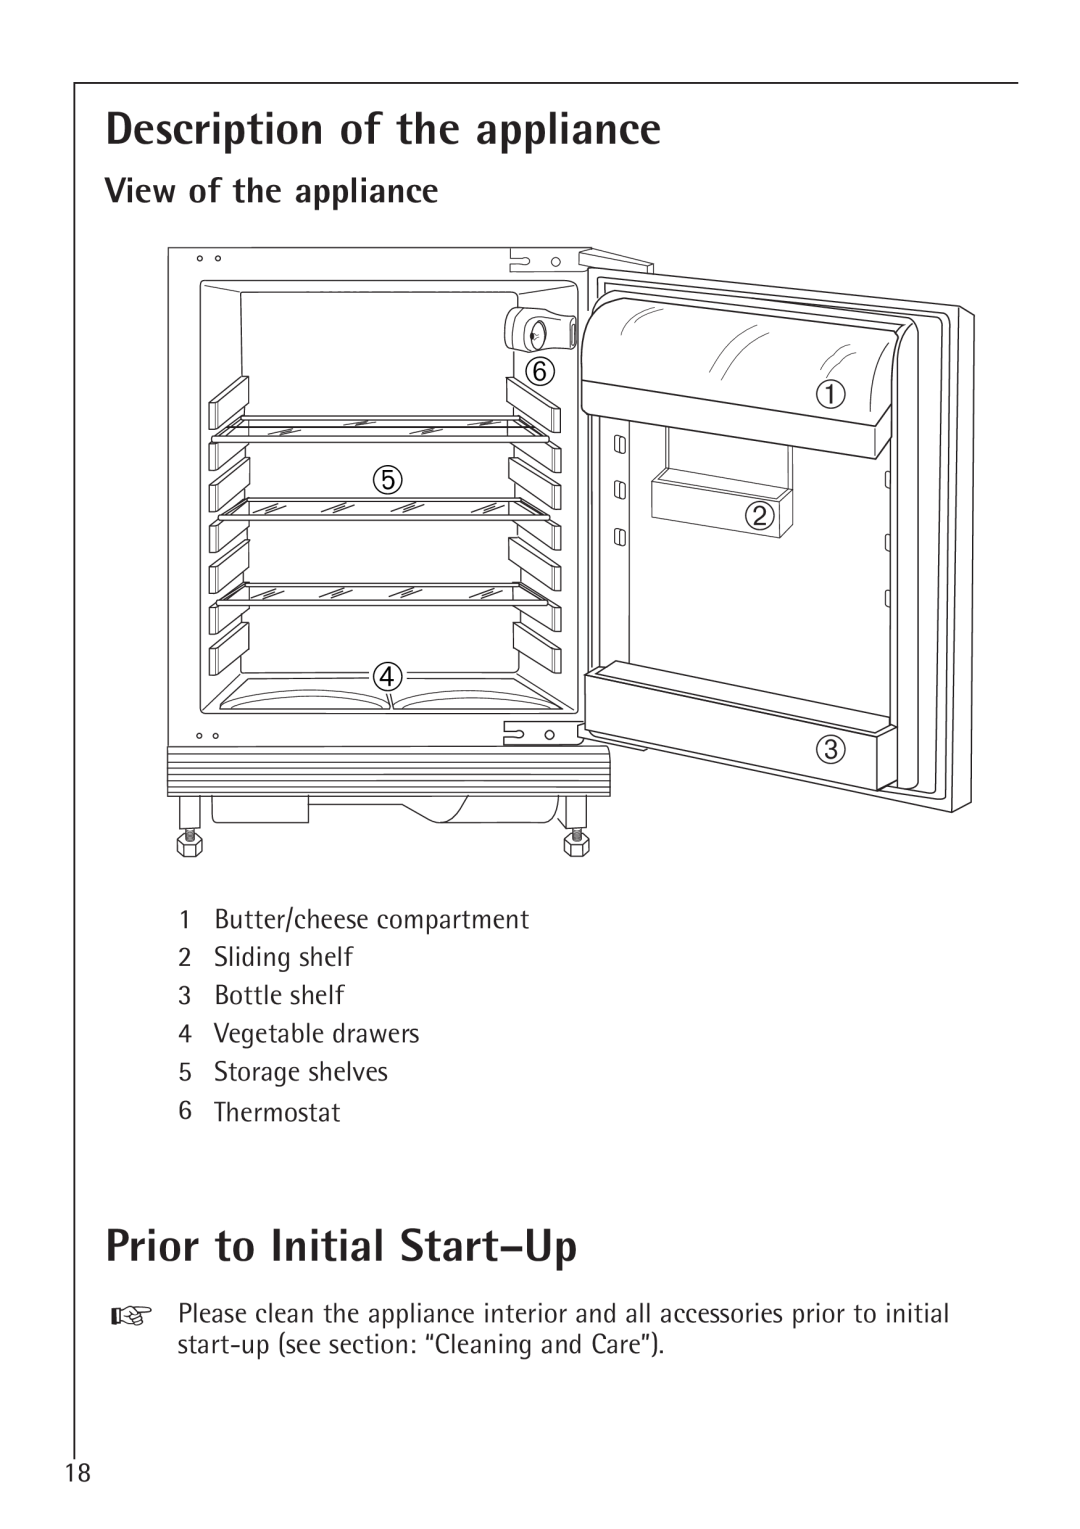 Electrolux U 86000-4 manual Description of the appliance, Prior to Initial Start-Up, View of the appliance 